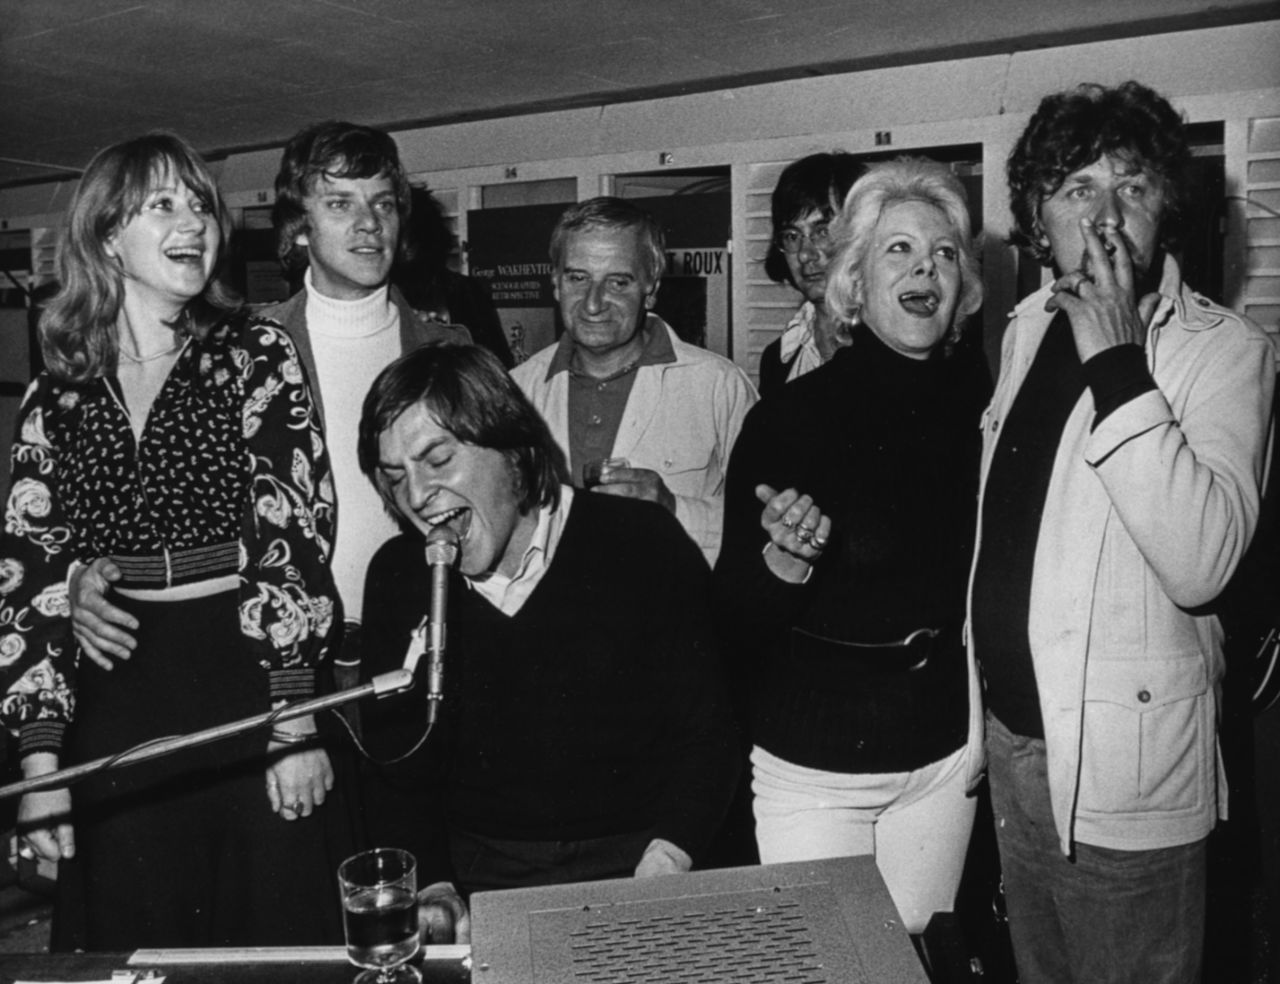 From left, Mirren, Malcolm McDowell, Lindsay Anderson, Rachel Roberts and Miroslav Ondricek sing around Alan Price as he plays the piano at the Cannes Film Festival in France.